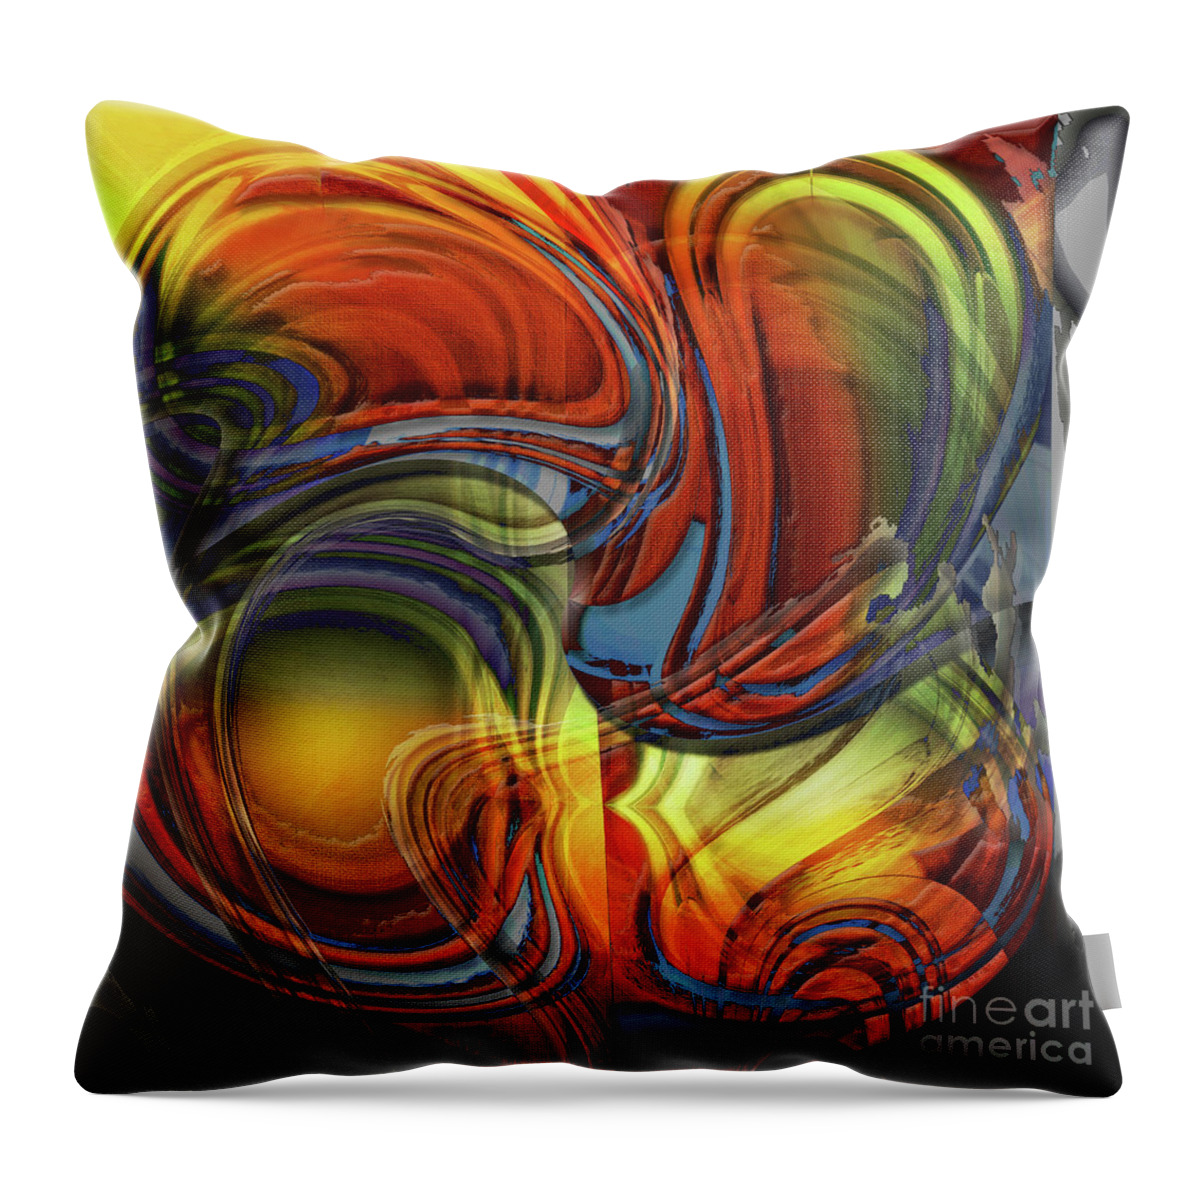 Still Life Throw Pillow featuring the photograph Upside Down by John Anderson